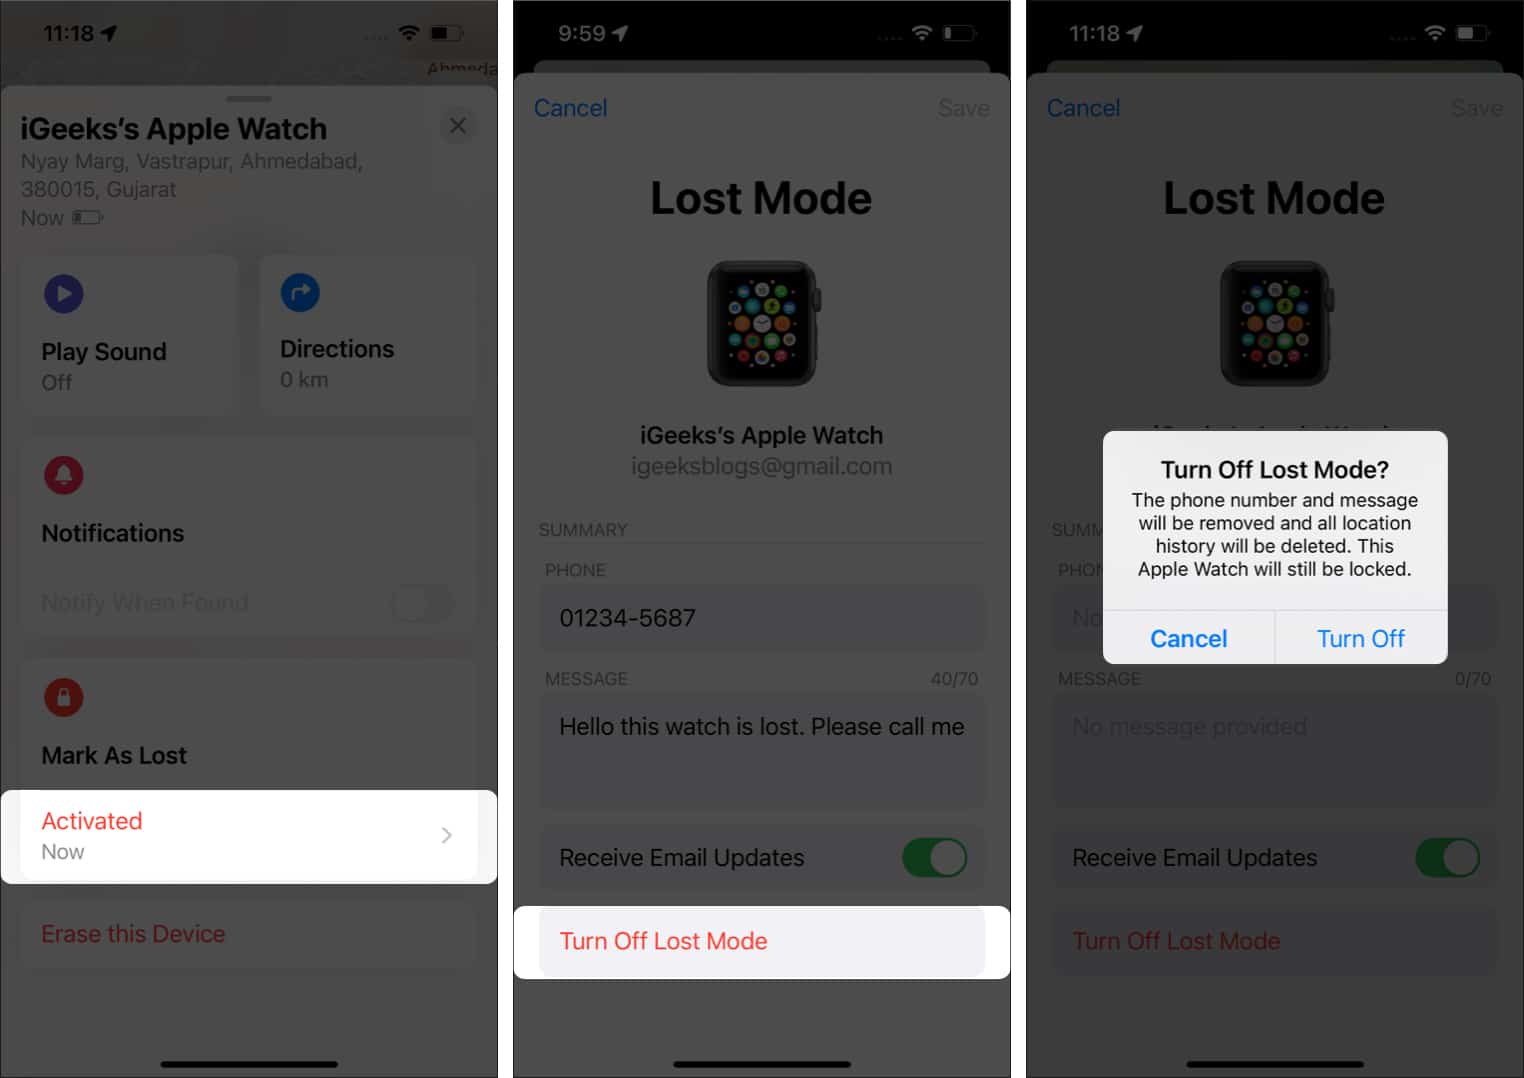 How to turn off or cancel Lost Mode